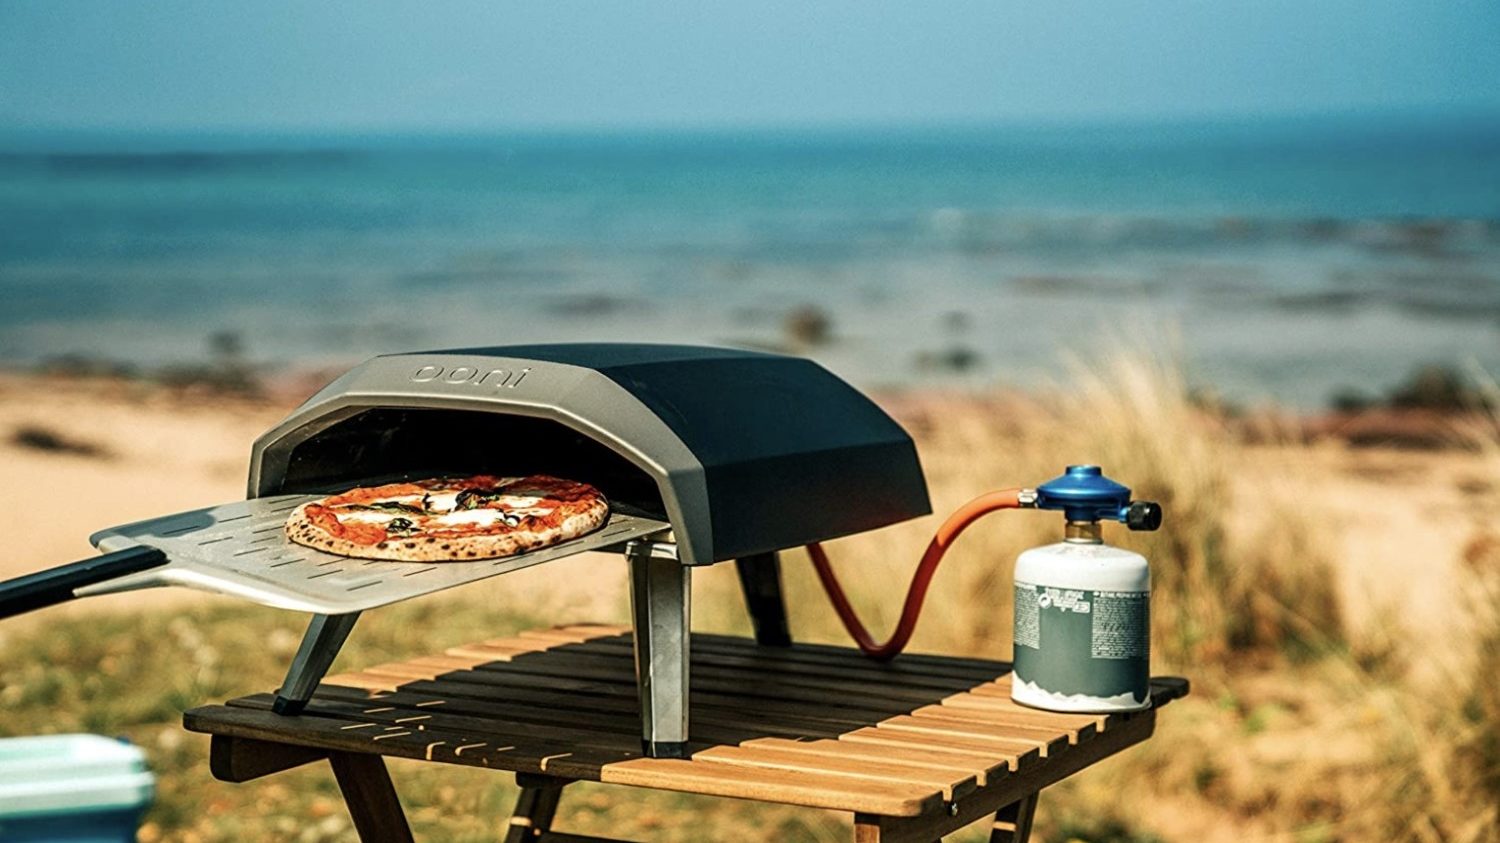 Pizza oven used outside on picnic bench